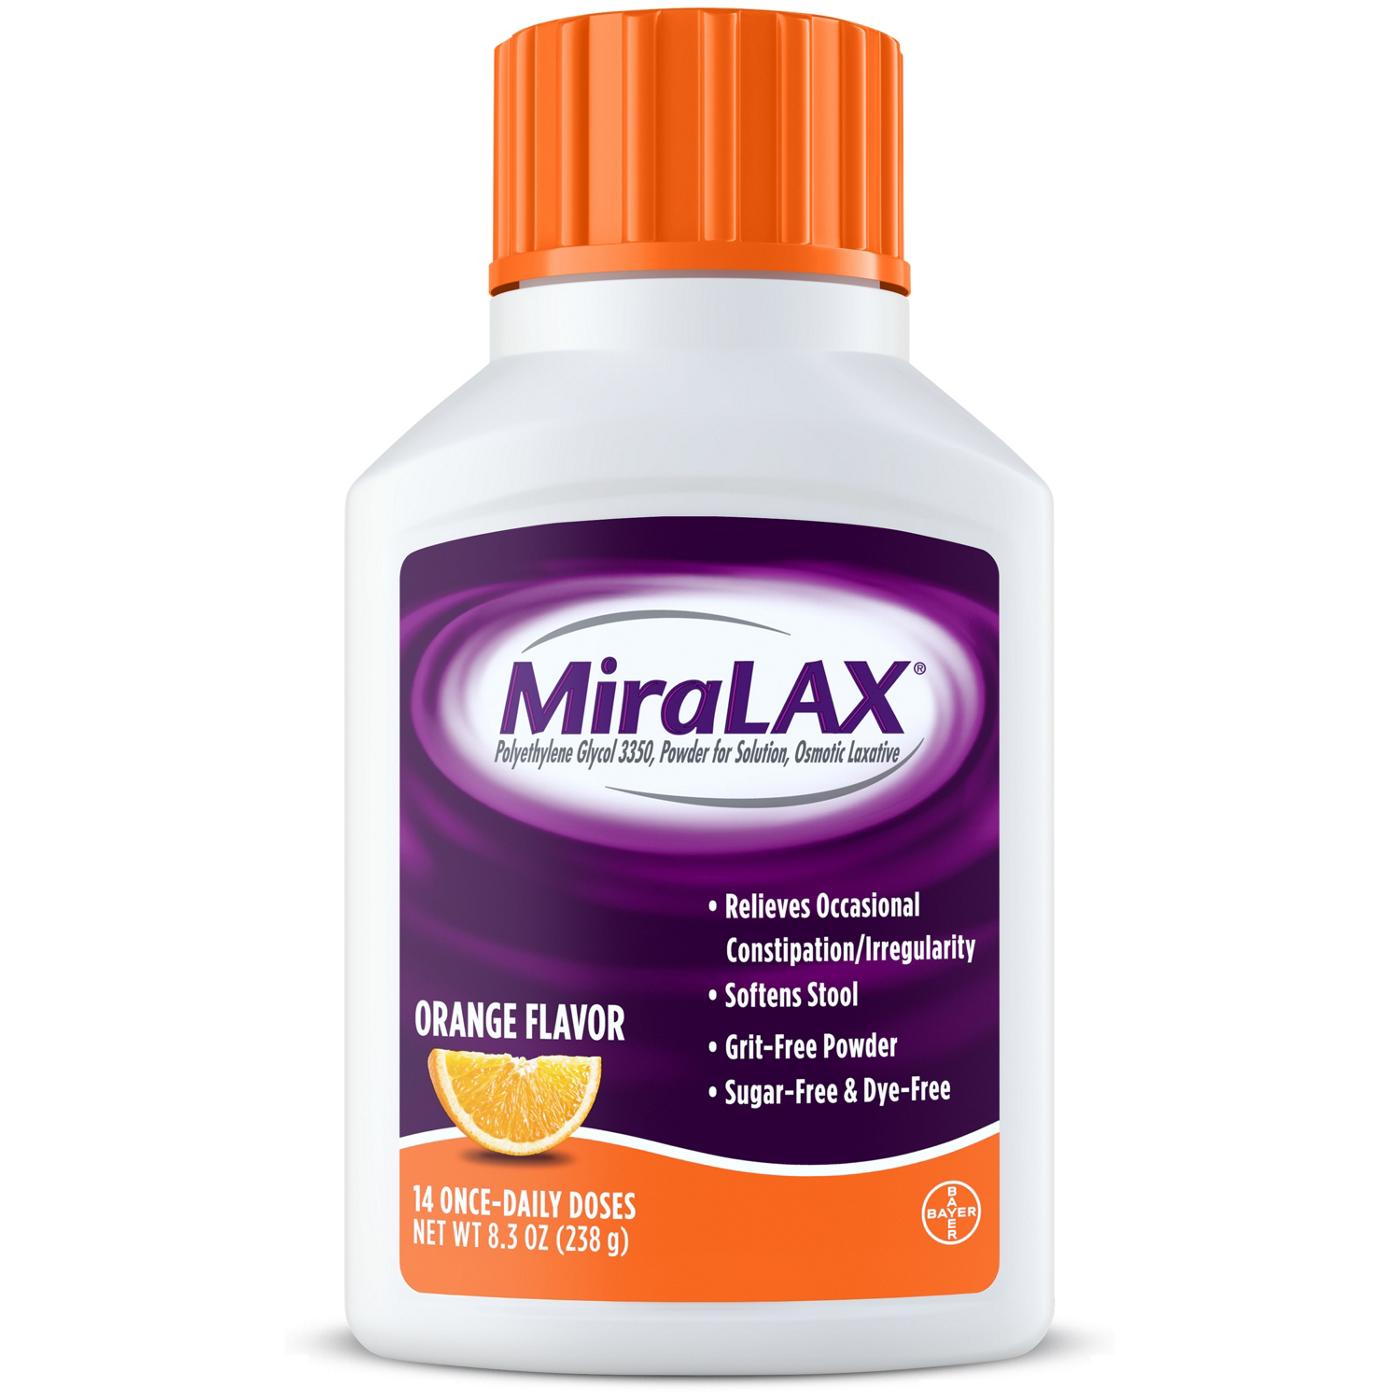 MiraLAX 14 Once-Daily Doses - Orange; image 1 of 2